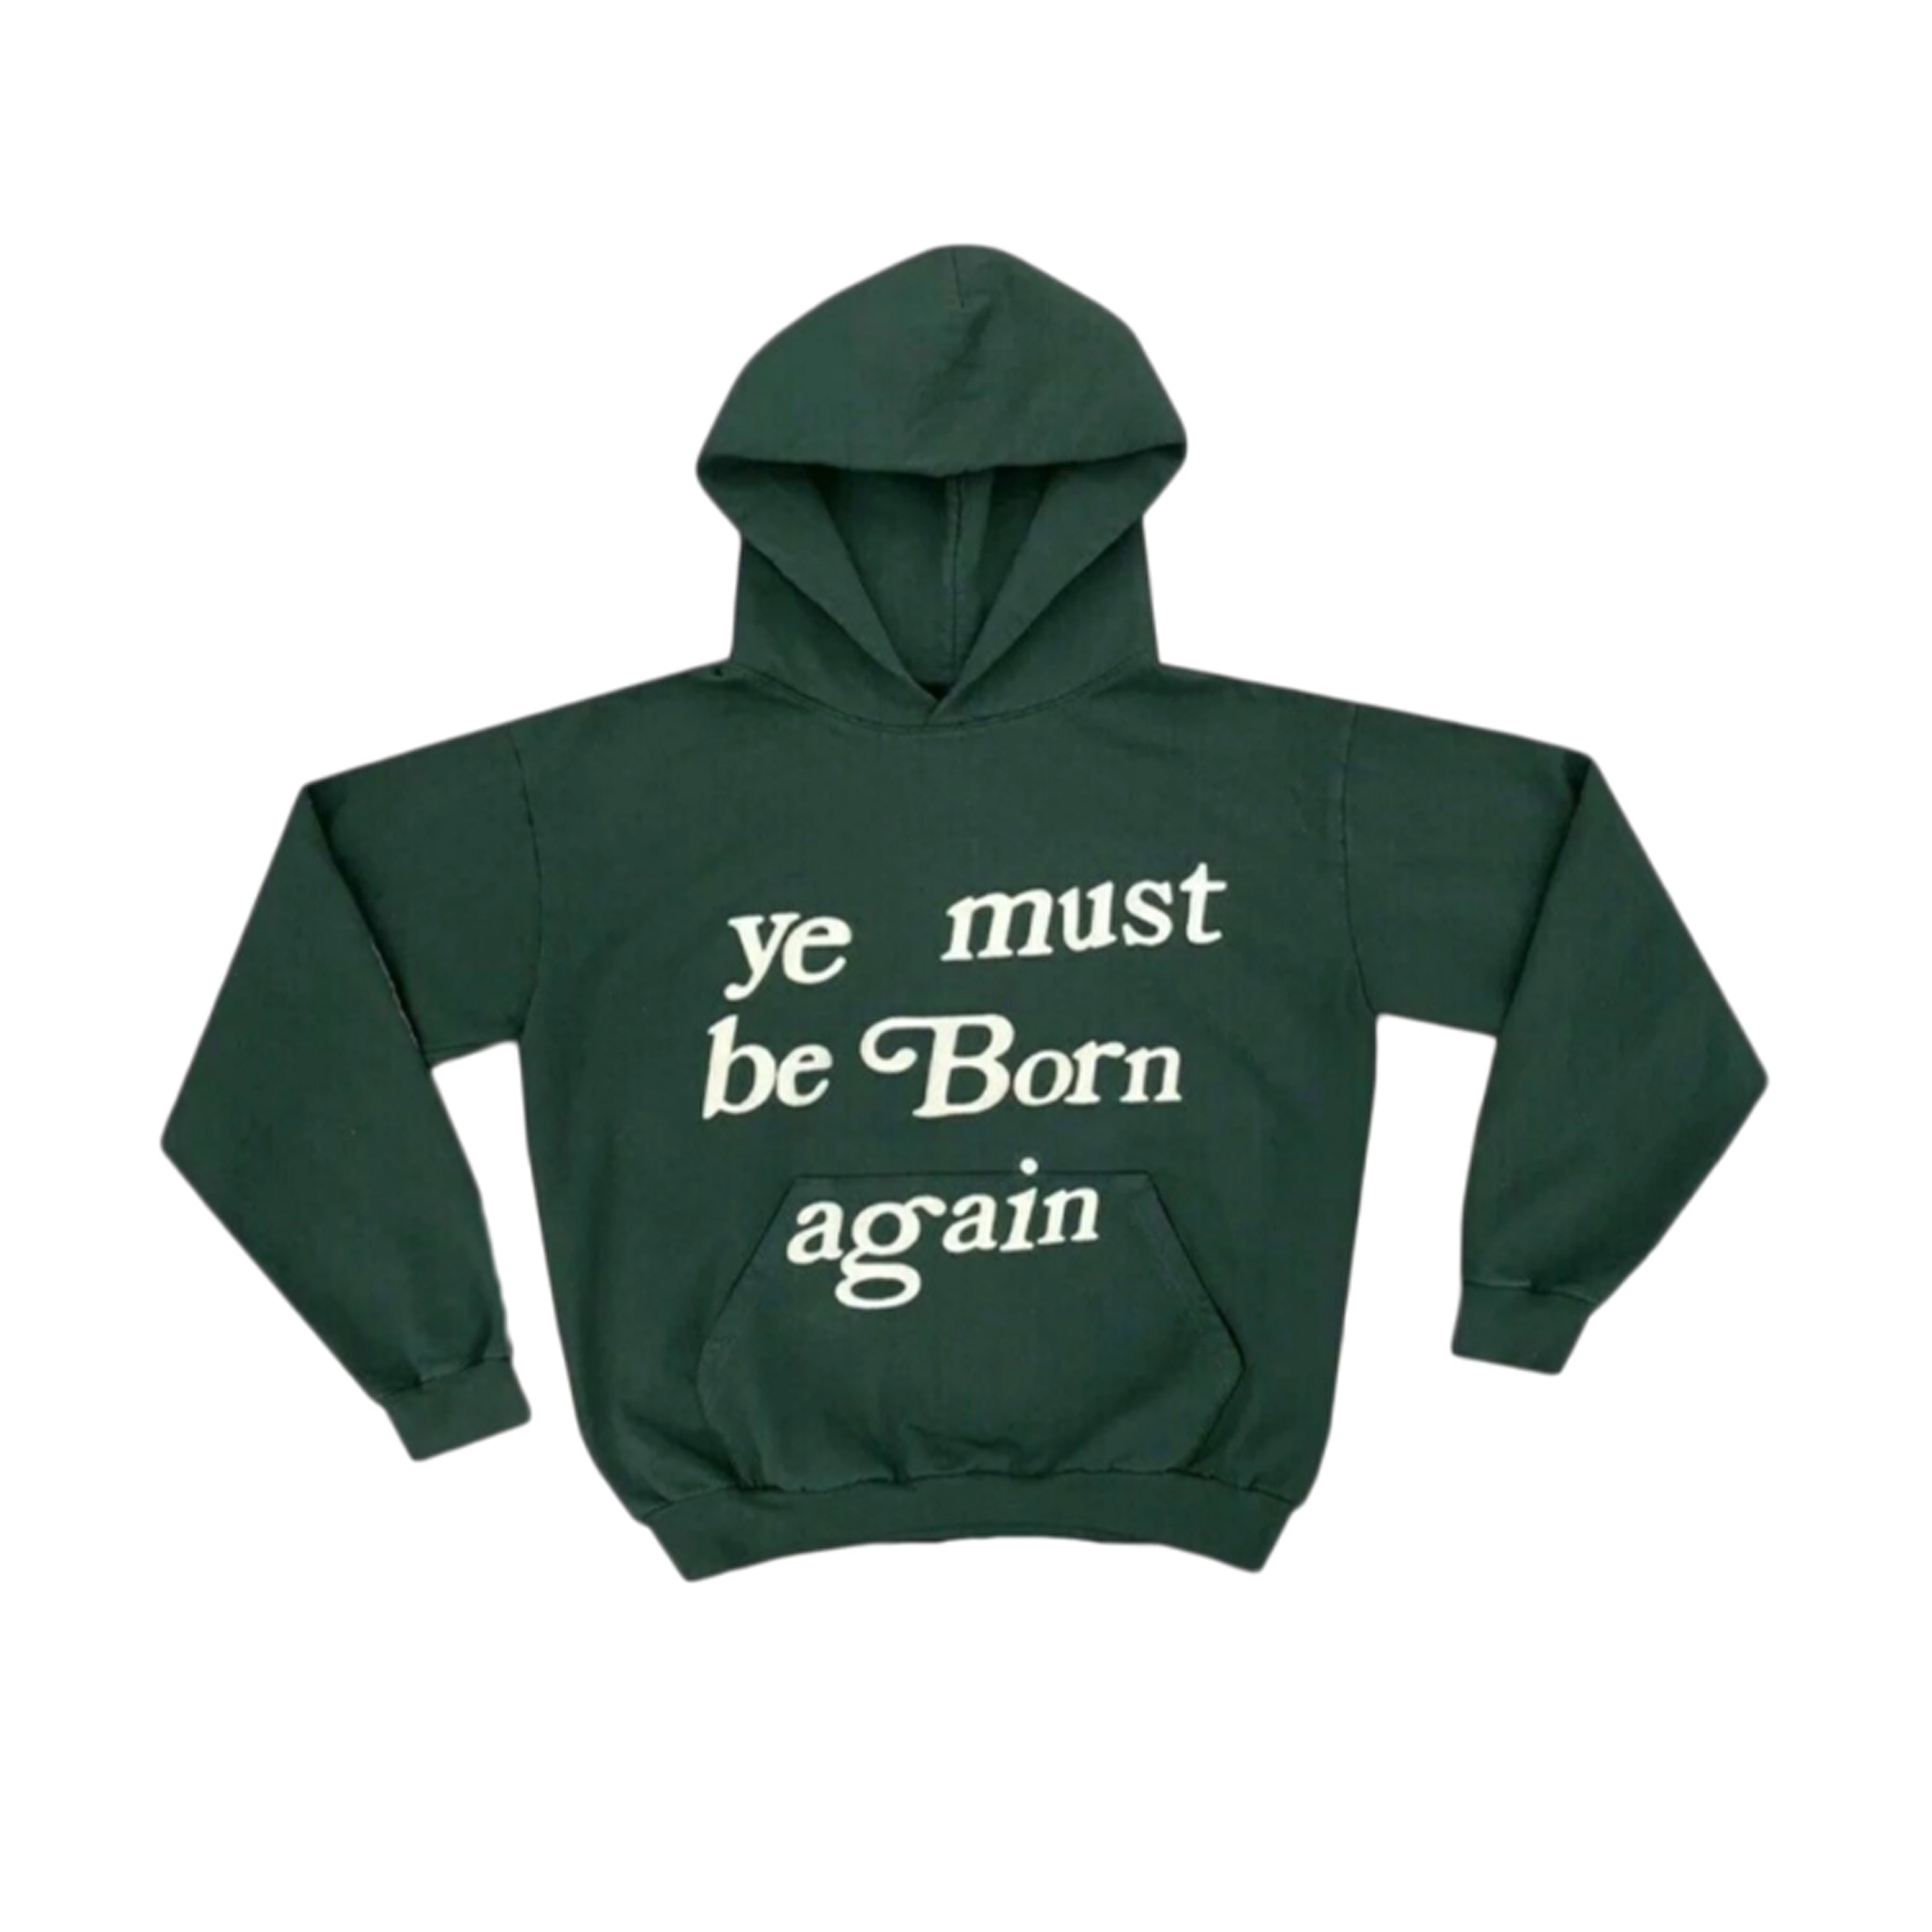 CPFM Hoodie "YE MUST BE BORN AGAIN" Forest Green New Size S